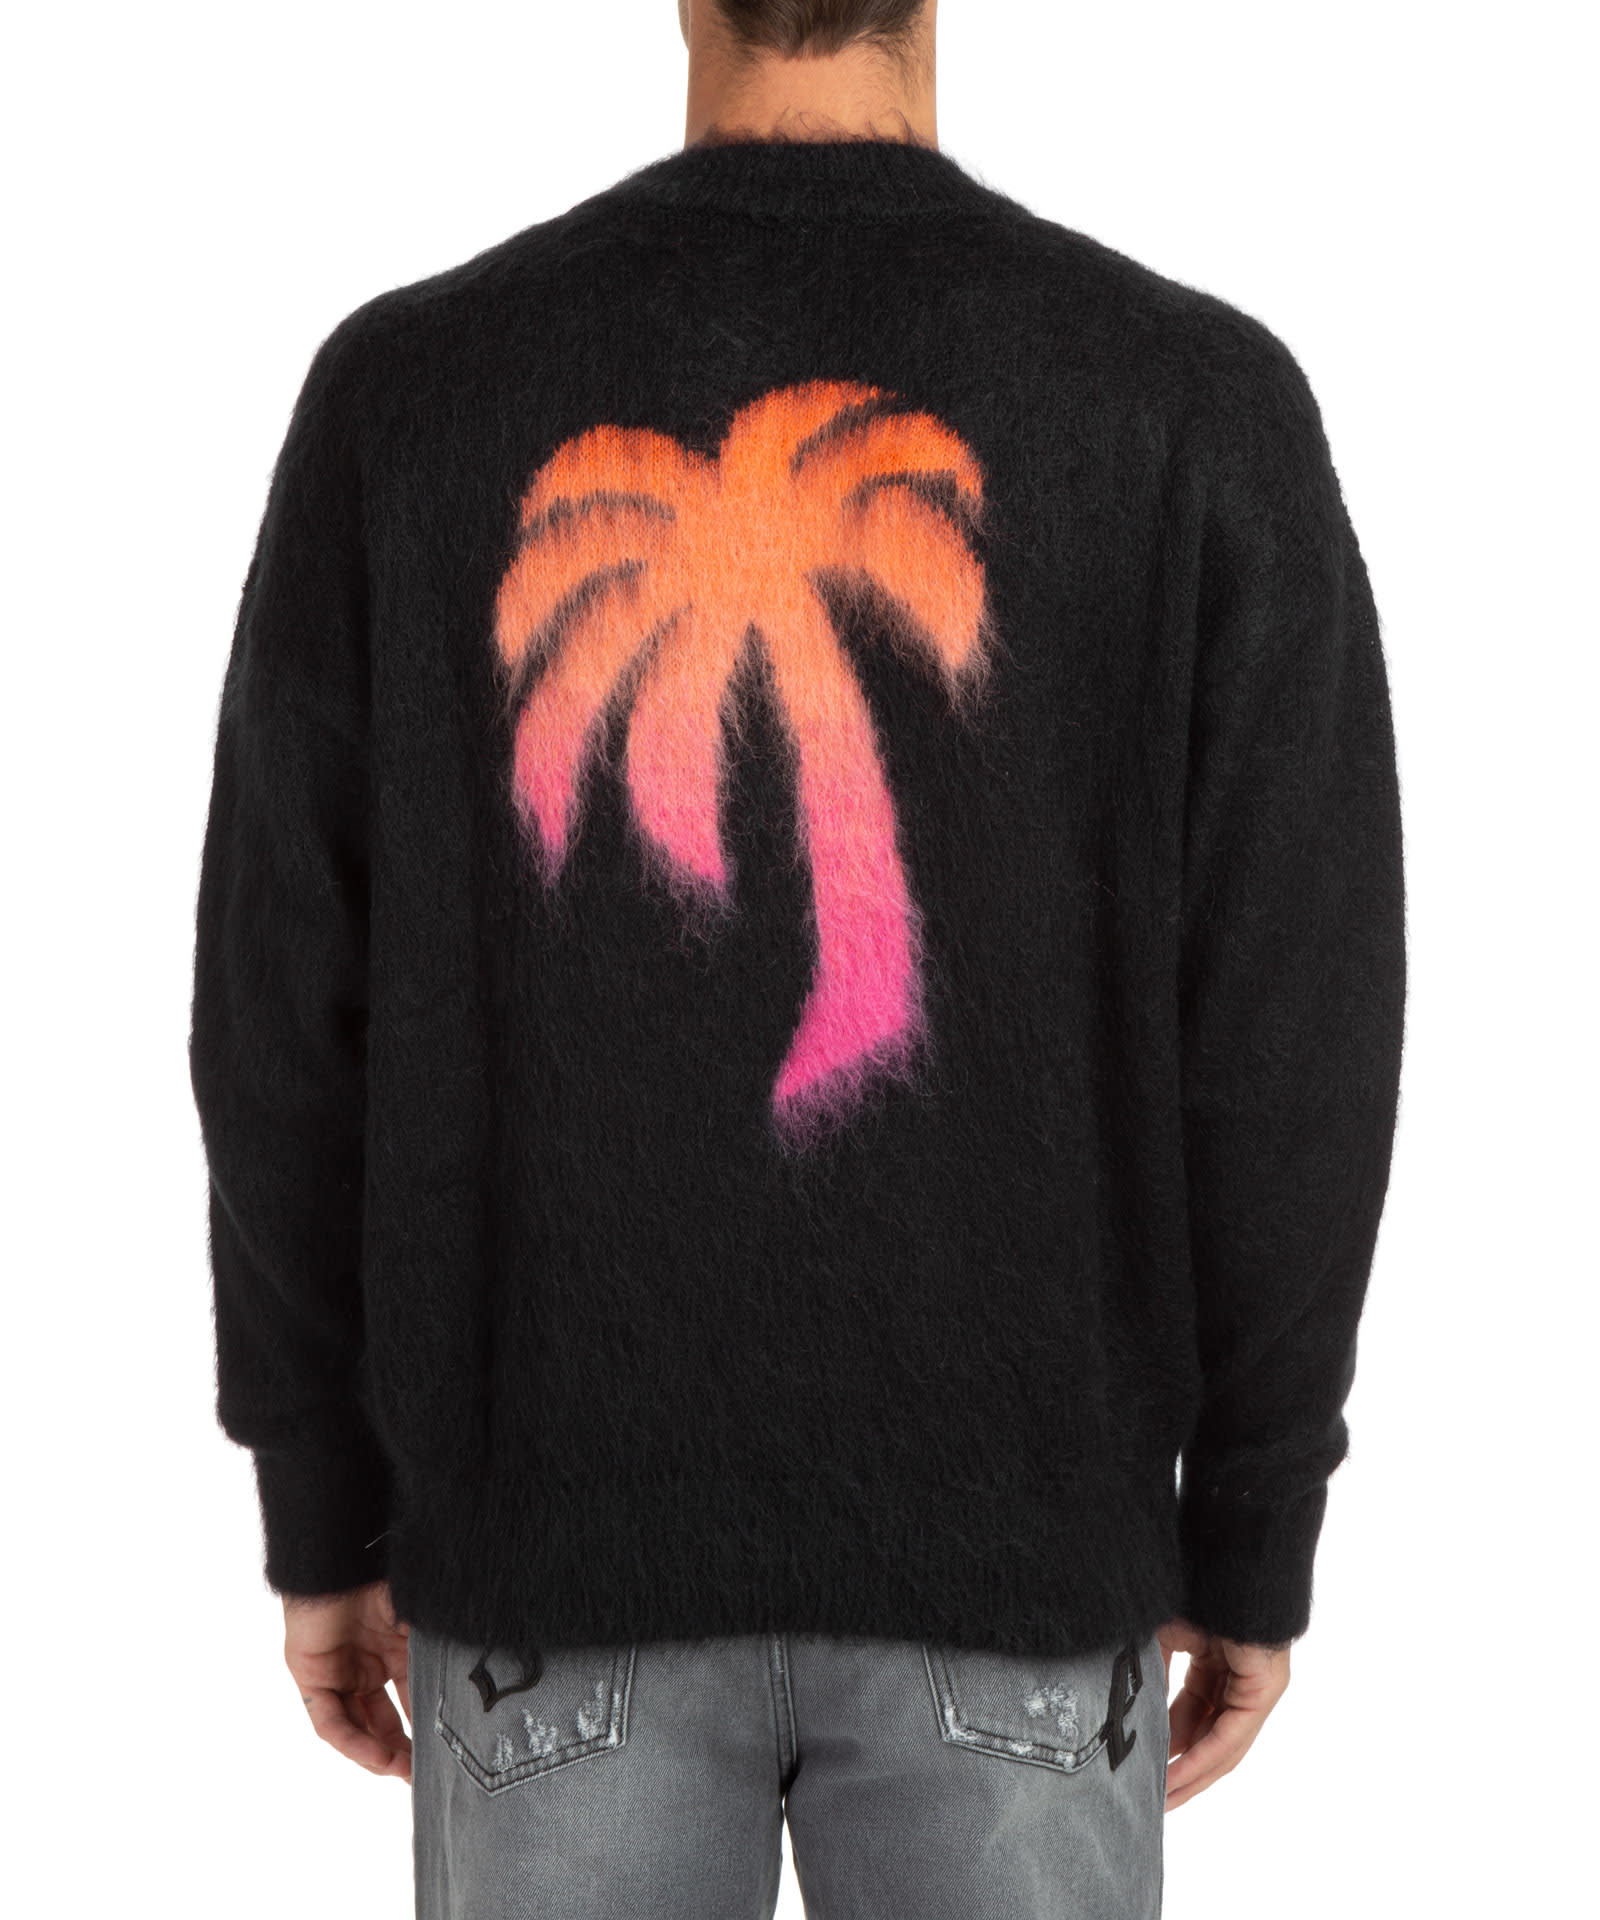 Palm Angels Wool Sweater